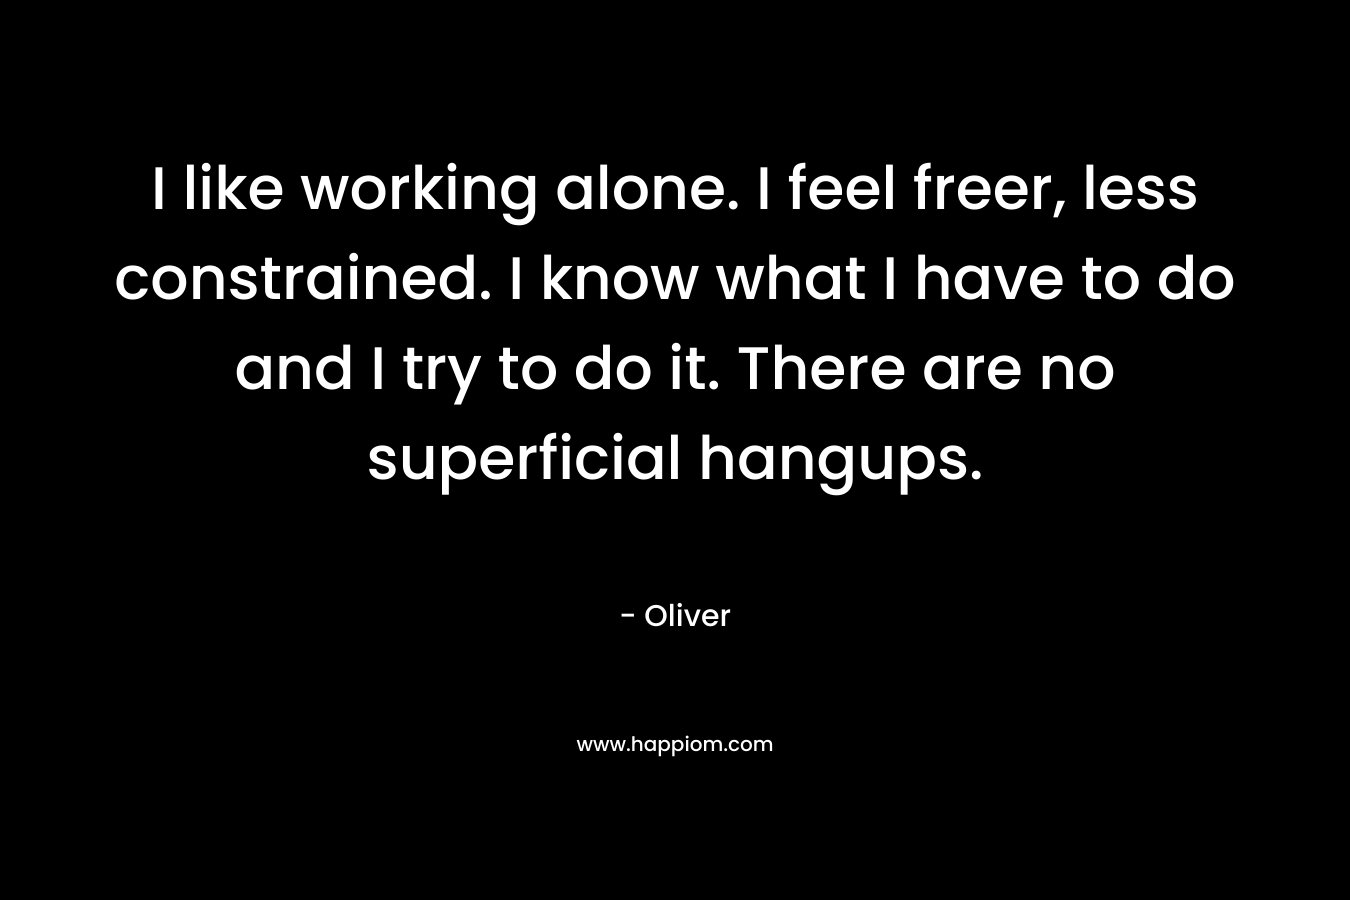 I like working alone. I feel freer, less constrained. I know what I have to do and I try to do it. There are no superficial hangups.